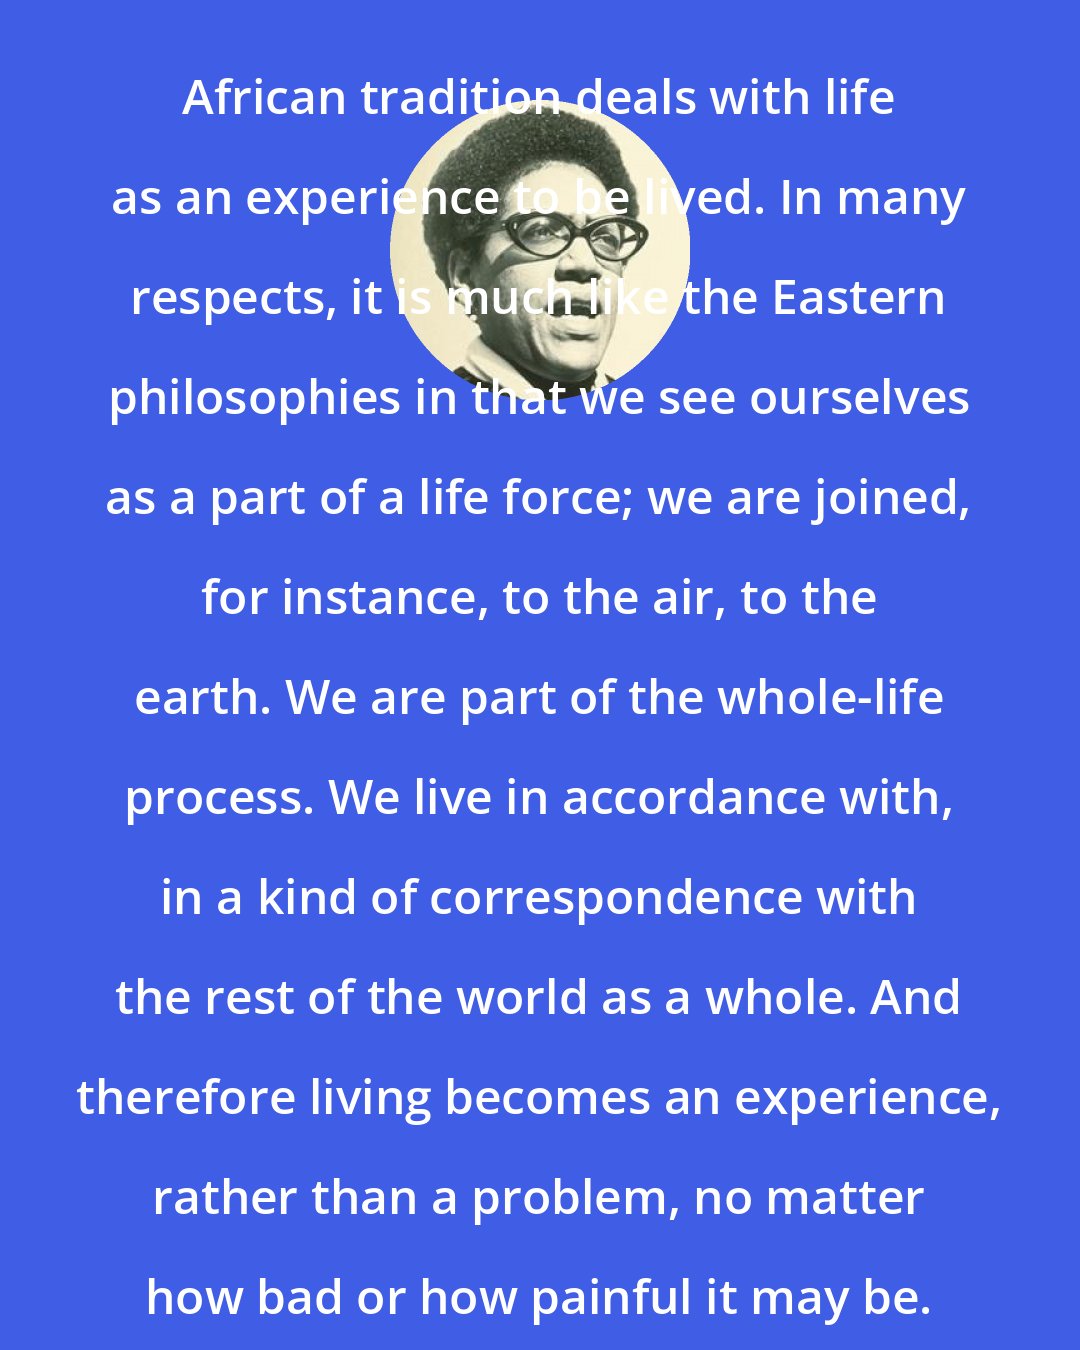 Audre Lorde: African tradition deals with life as an experience to be lived. In many respects, it is much like the Eastern philosophies in that we see ourselves as a part of a life force; we are joined, for instance, to the air, to the earth. We are part of the whole-life process. We live in accordance with, in a kind of correspondence with the rest of the world as a whole. And therefore living becomes an experience, rather than a problem, no matter how bad or how painful it may be.